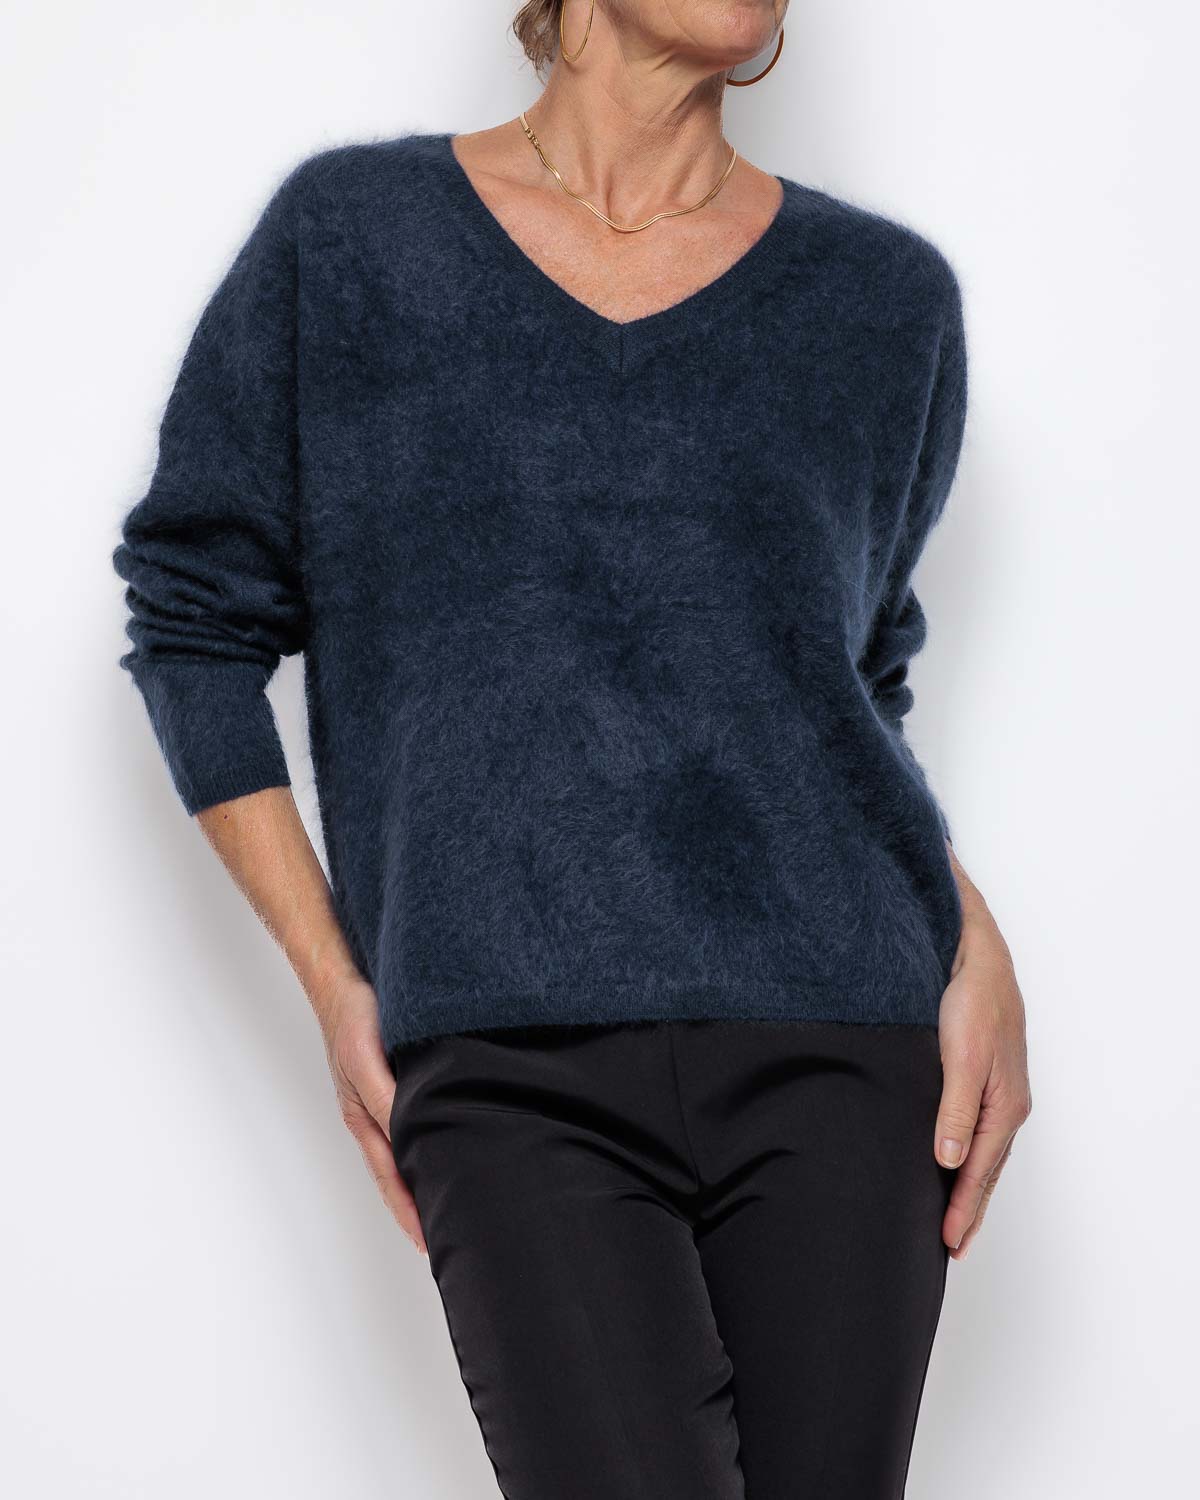 Absolut Cashmere Soeli Sweater in Nuit